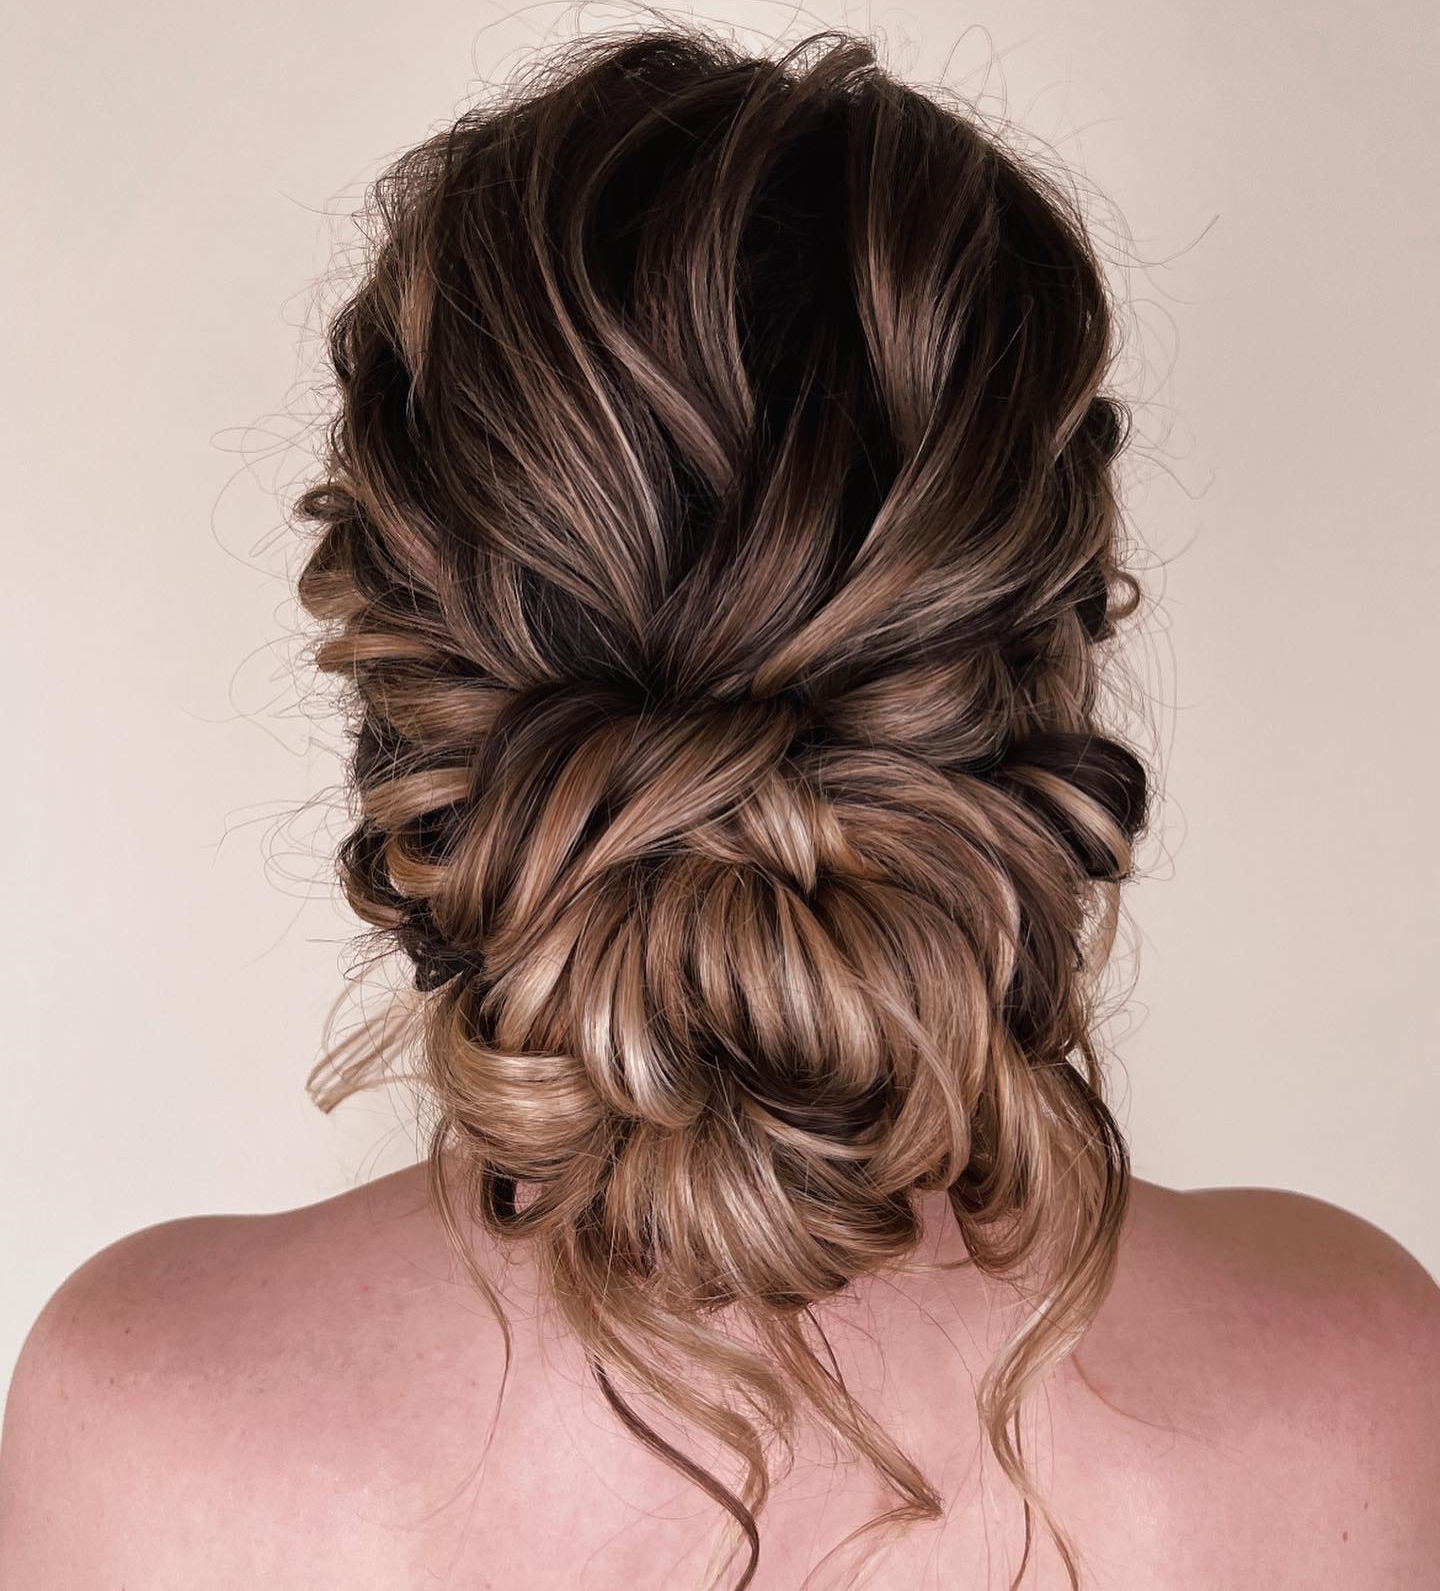 50 Romantic Wedding Hairstyles to Bring the Bride’s Image to Perfection ...